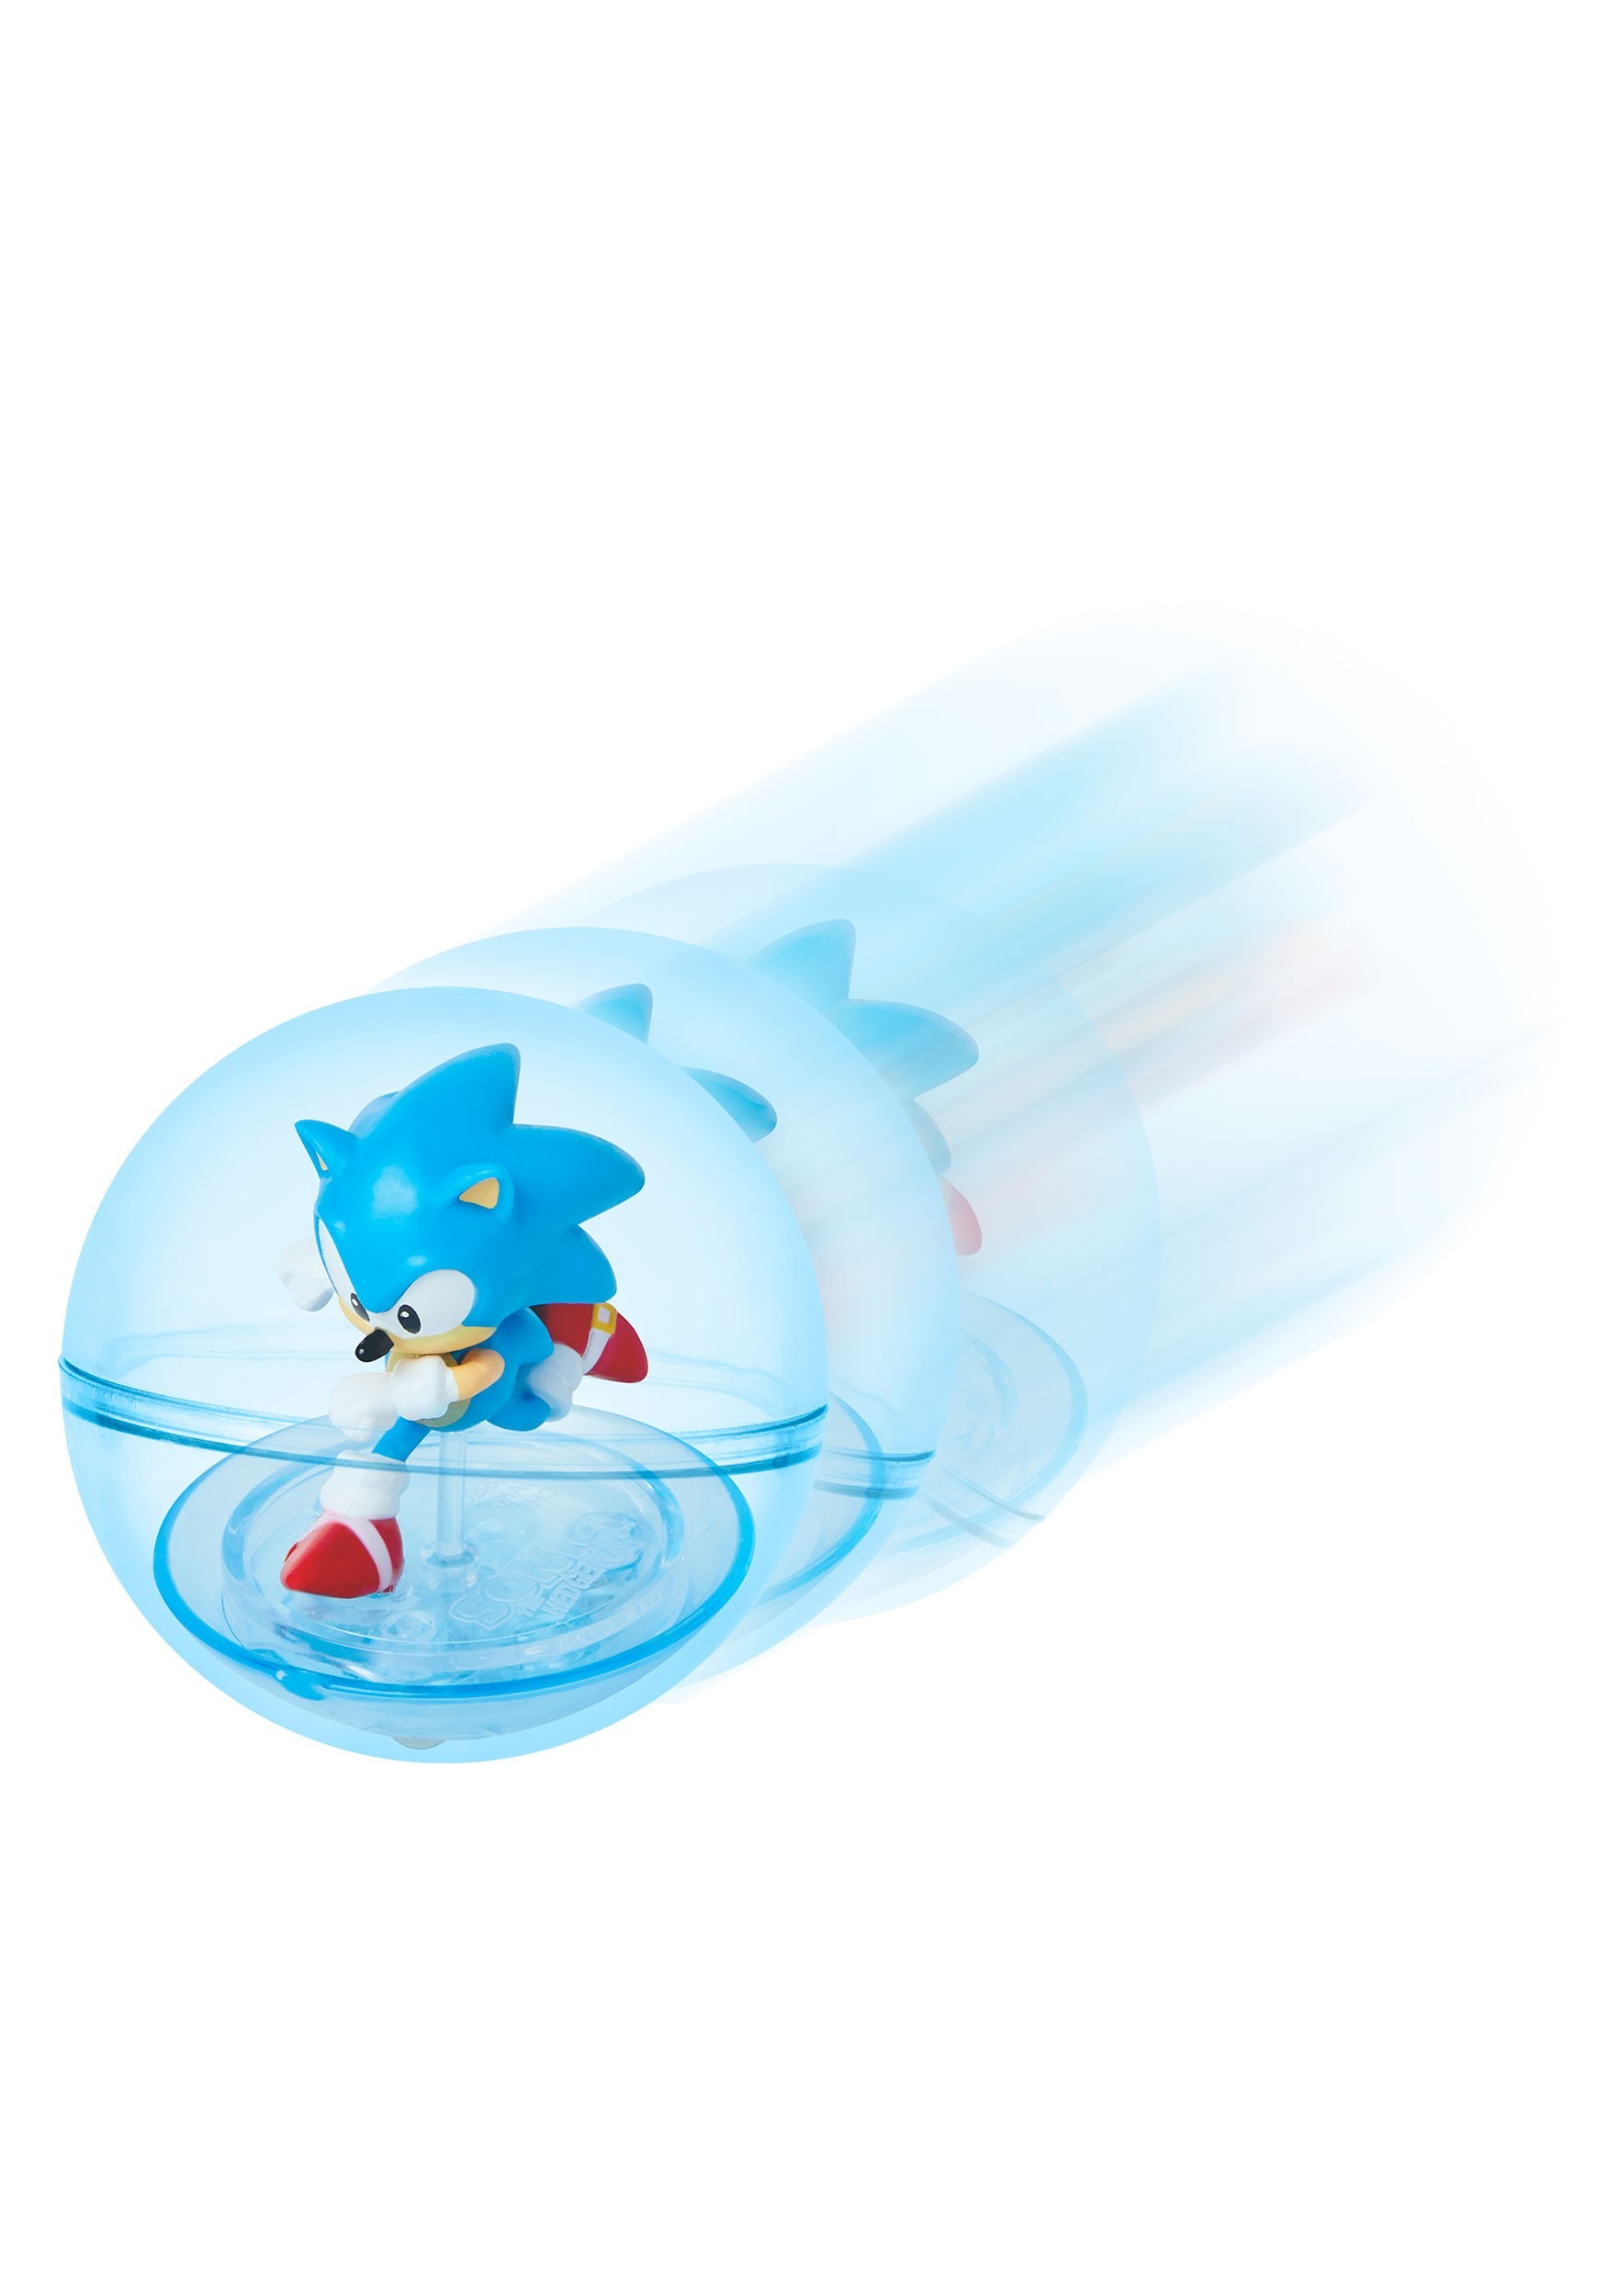 Sonic spin. Sonic Spin Dash. Dash and Spin super fast Sonic. Спин деш 16 бит.